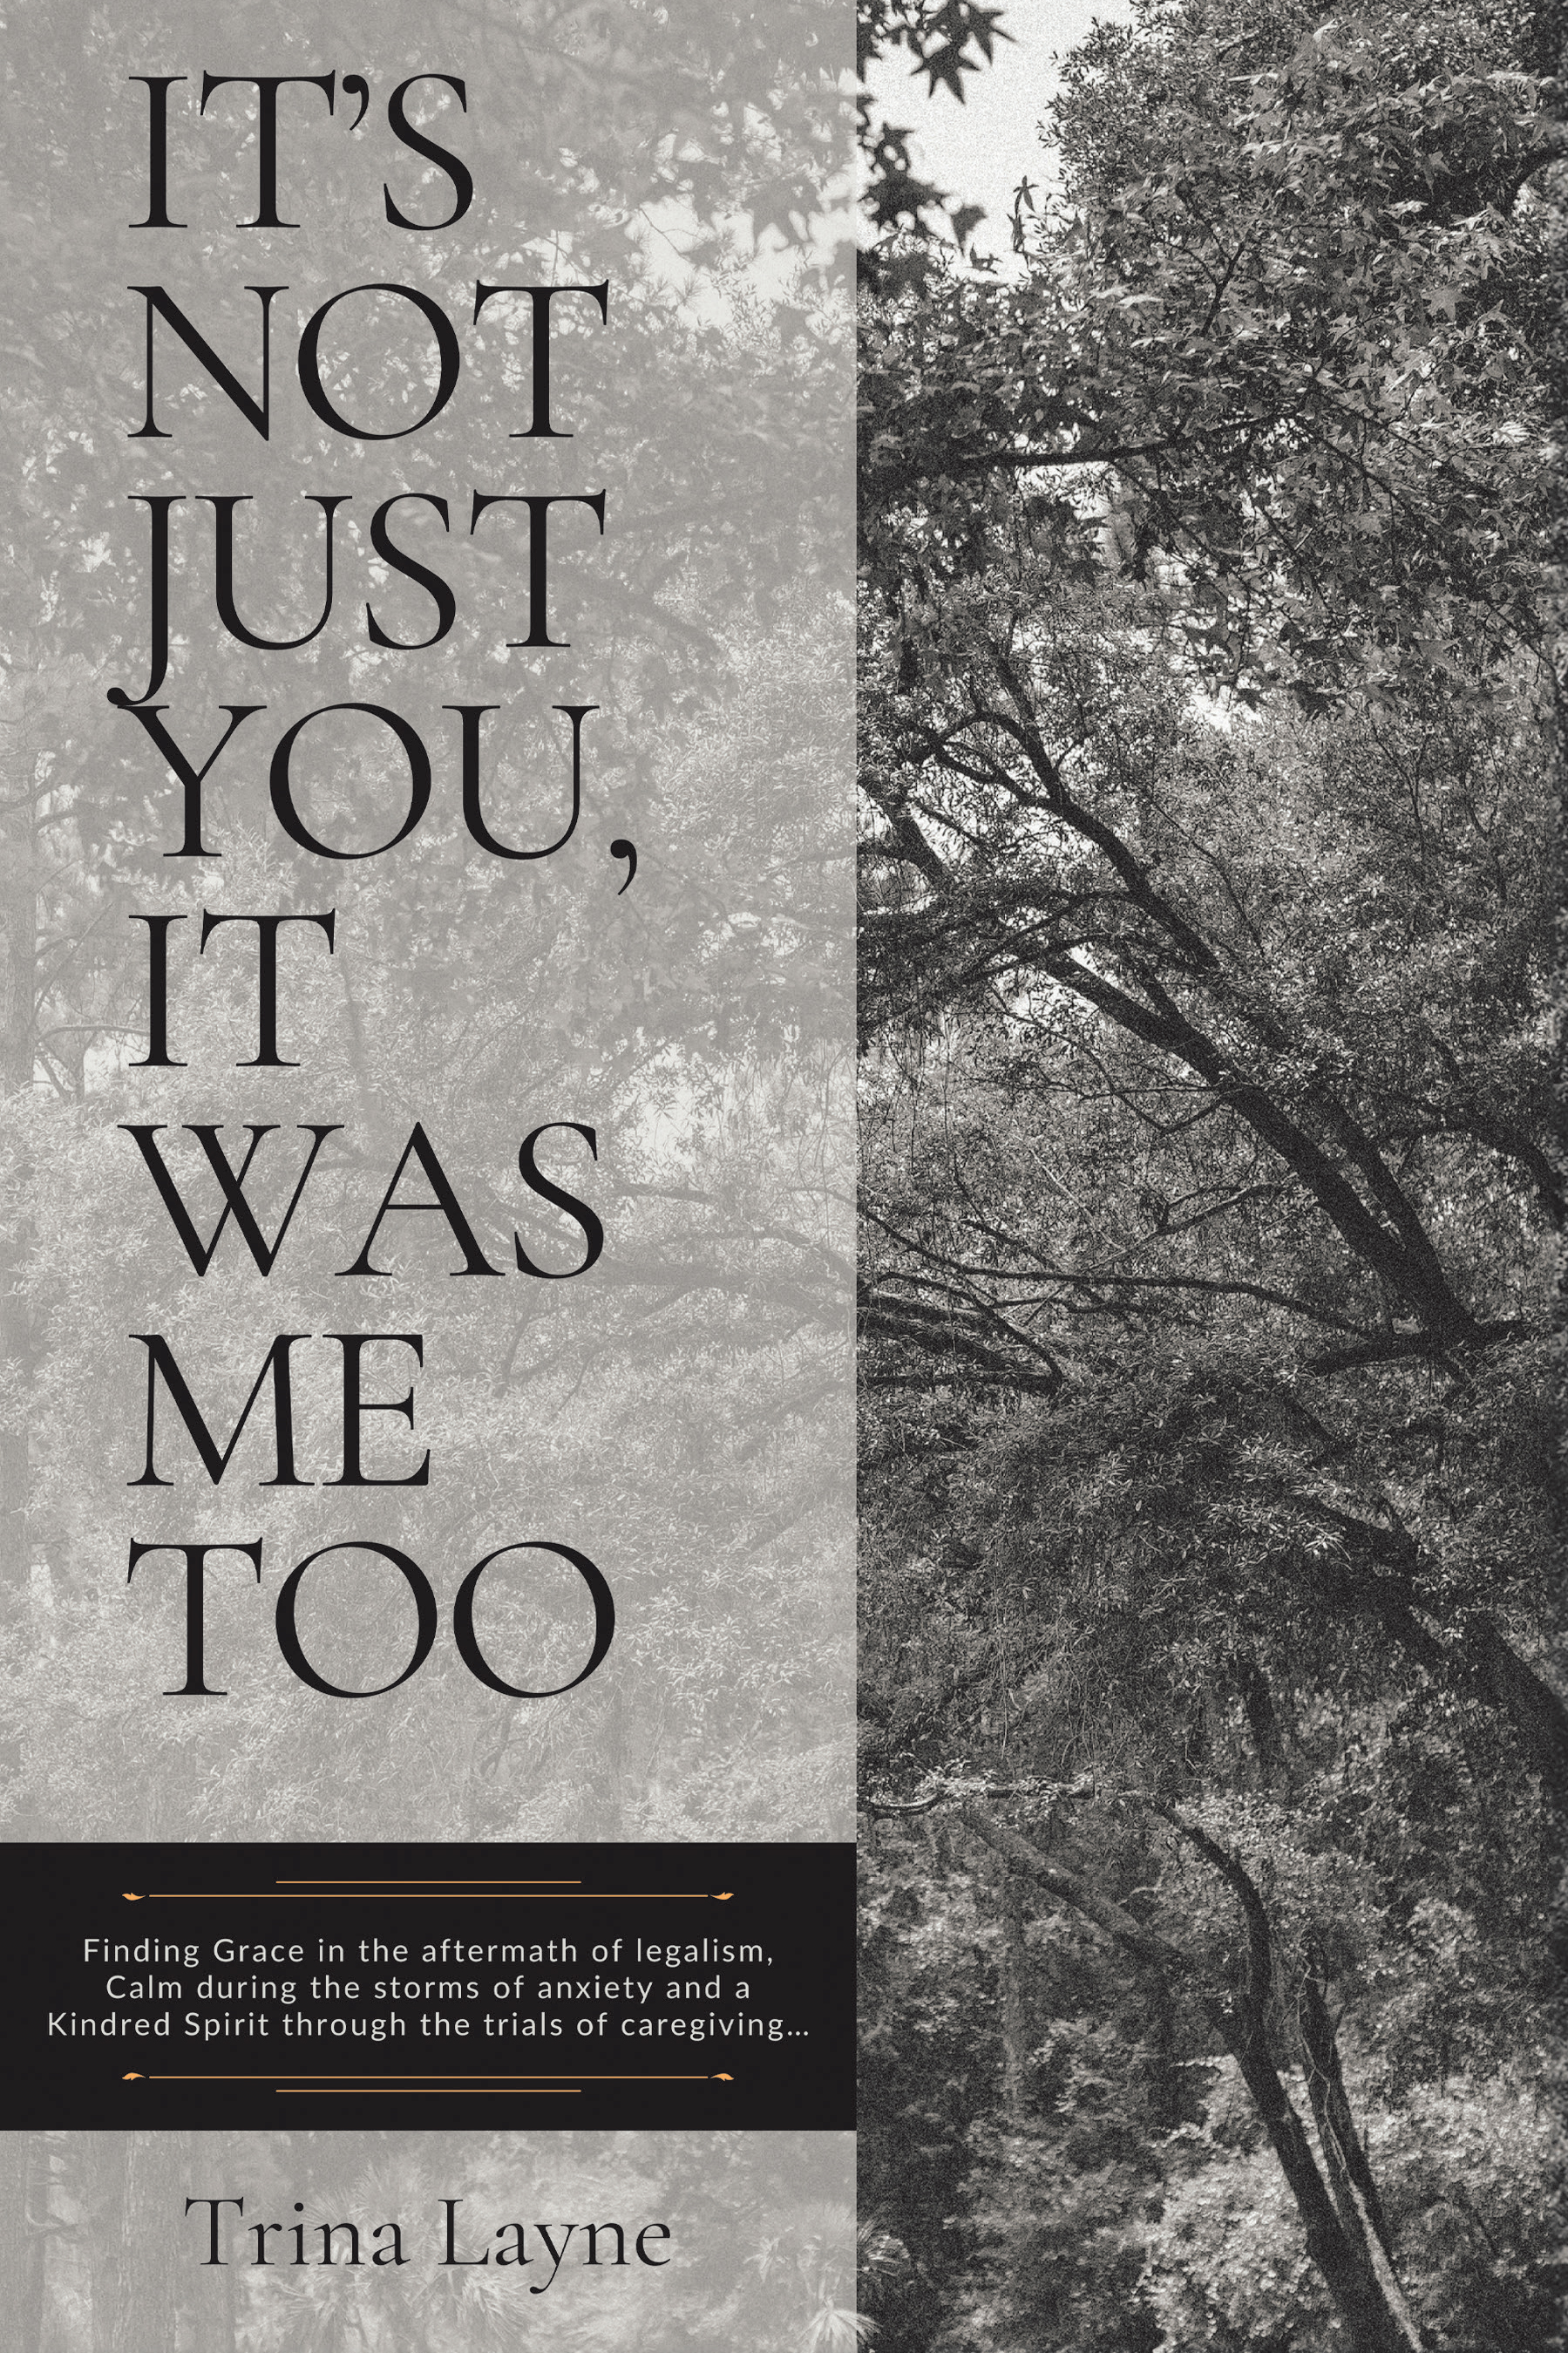 Trina Layne’s Newly Released "It’s Not Just You, It Was Me Too" Offers Comfort and Guidance Through Life’s Challenges